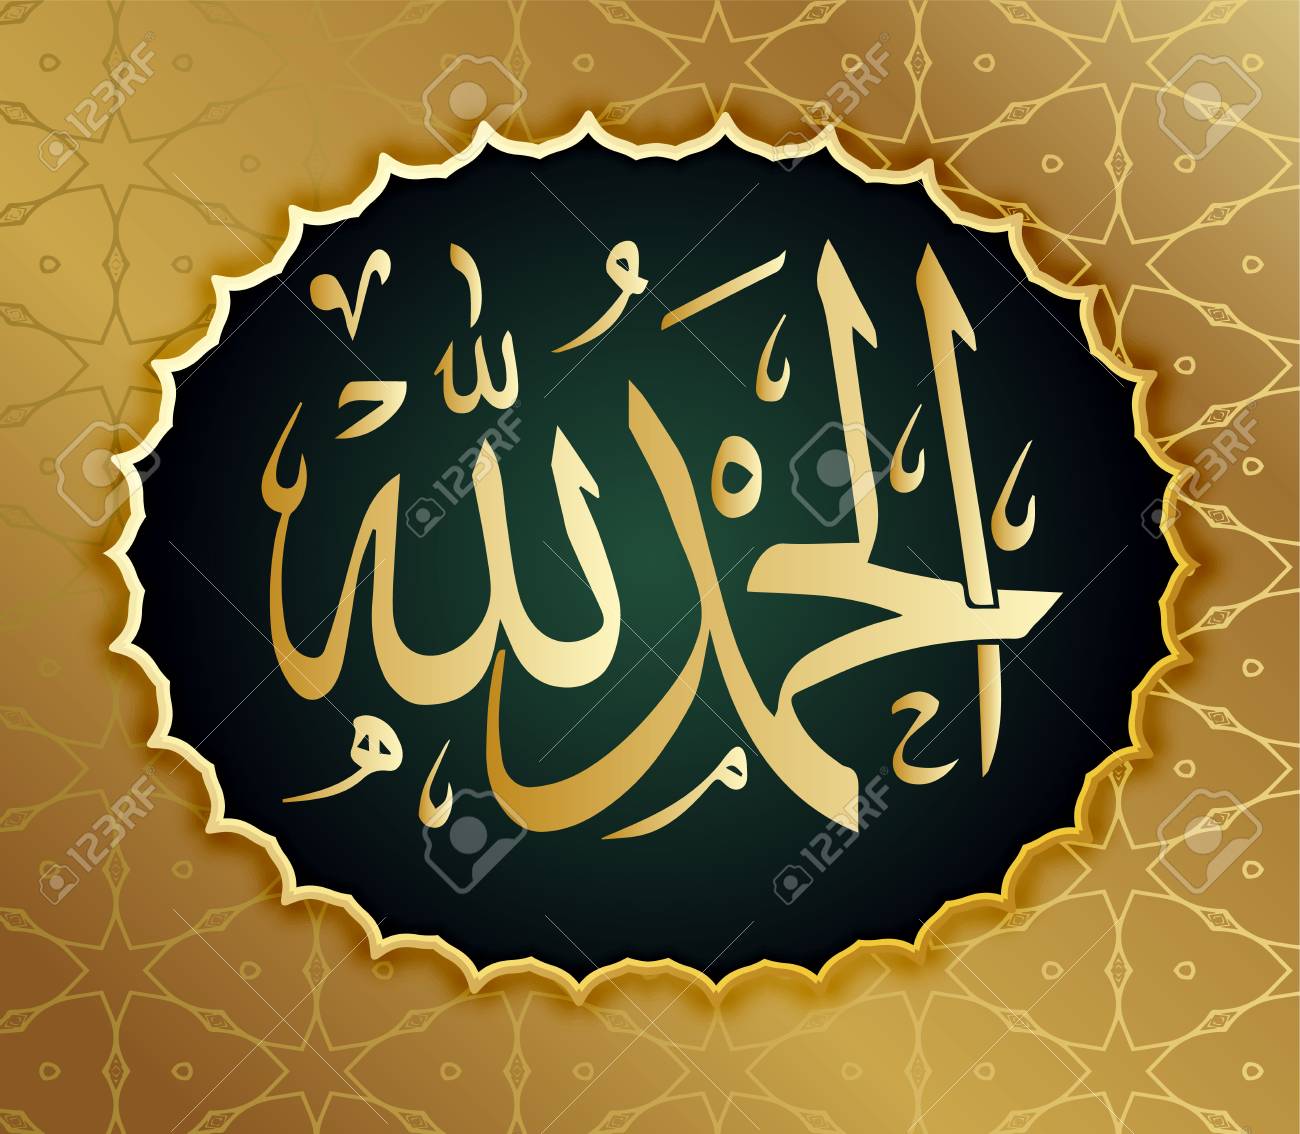 Arabic Calligraphy Alhamdulillah Against The Background Of